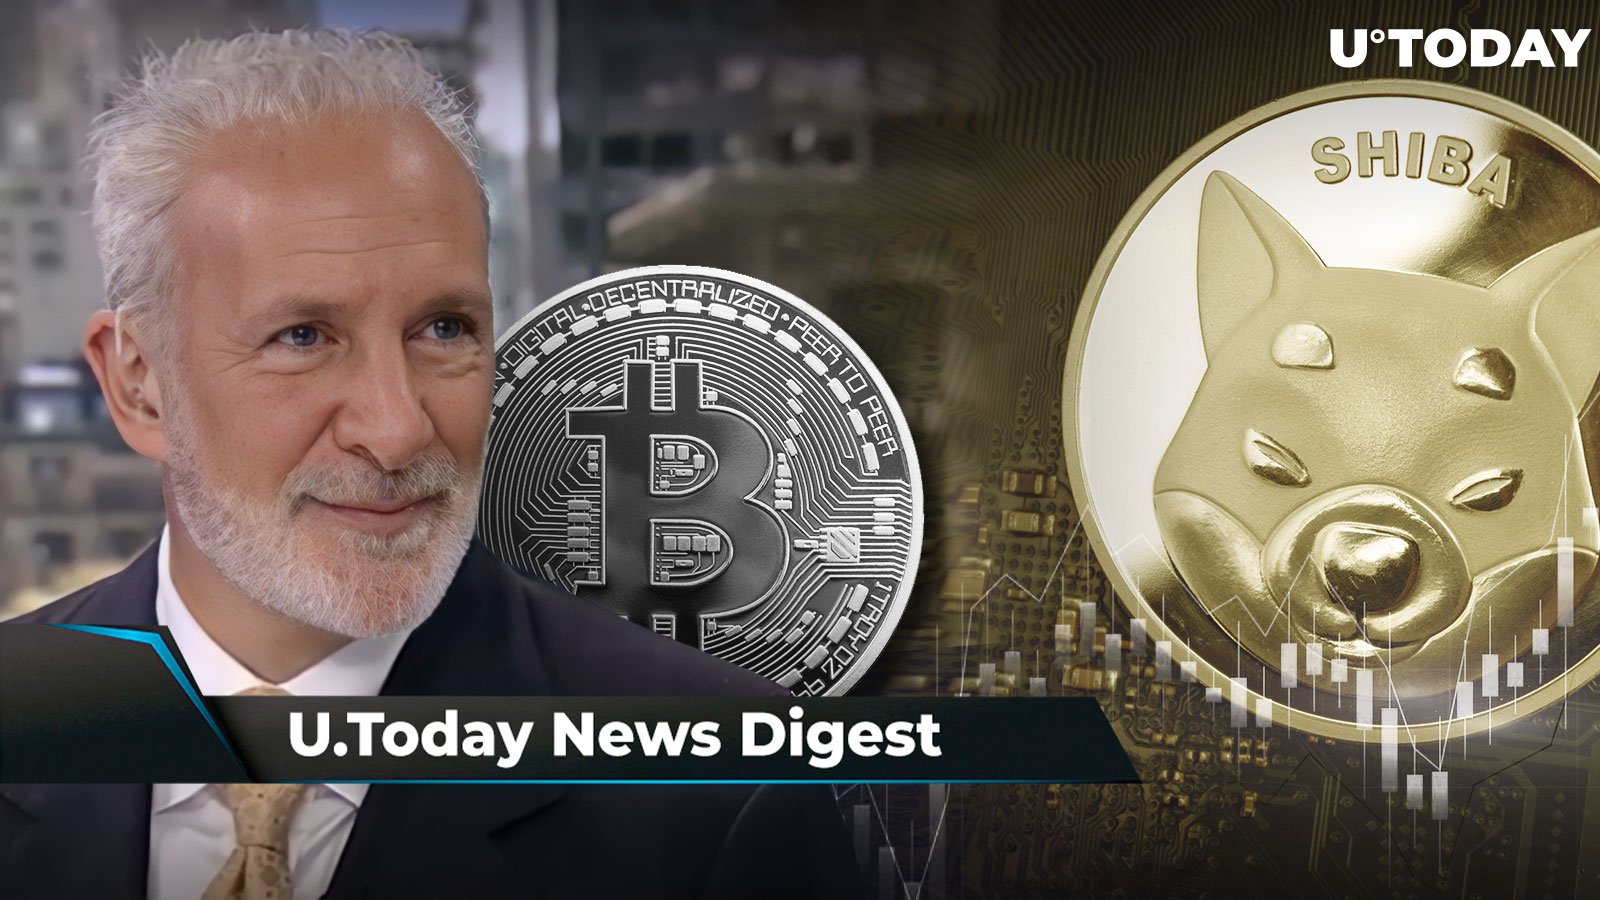 Peter Schiff Has “Christmas Gift” for BTC Holders, DOGE Turns into Top Traded Crypto After Elon Musk’s Post, SHIB Forms Reversal Pattern: Crypto News Digest by U.Today